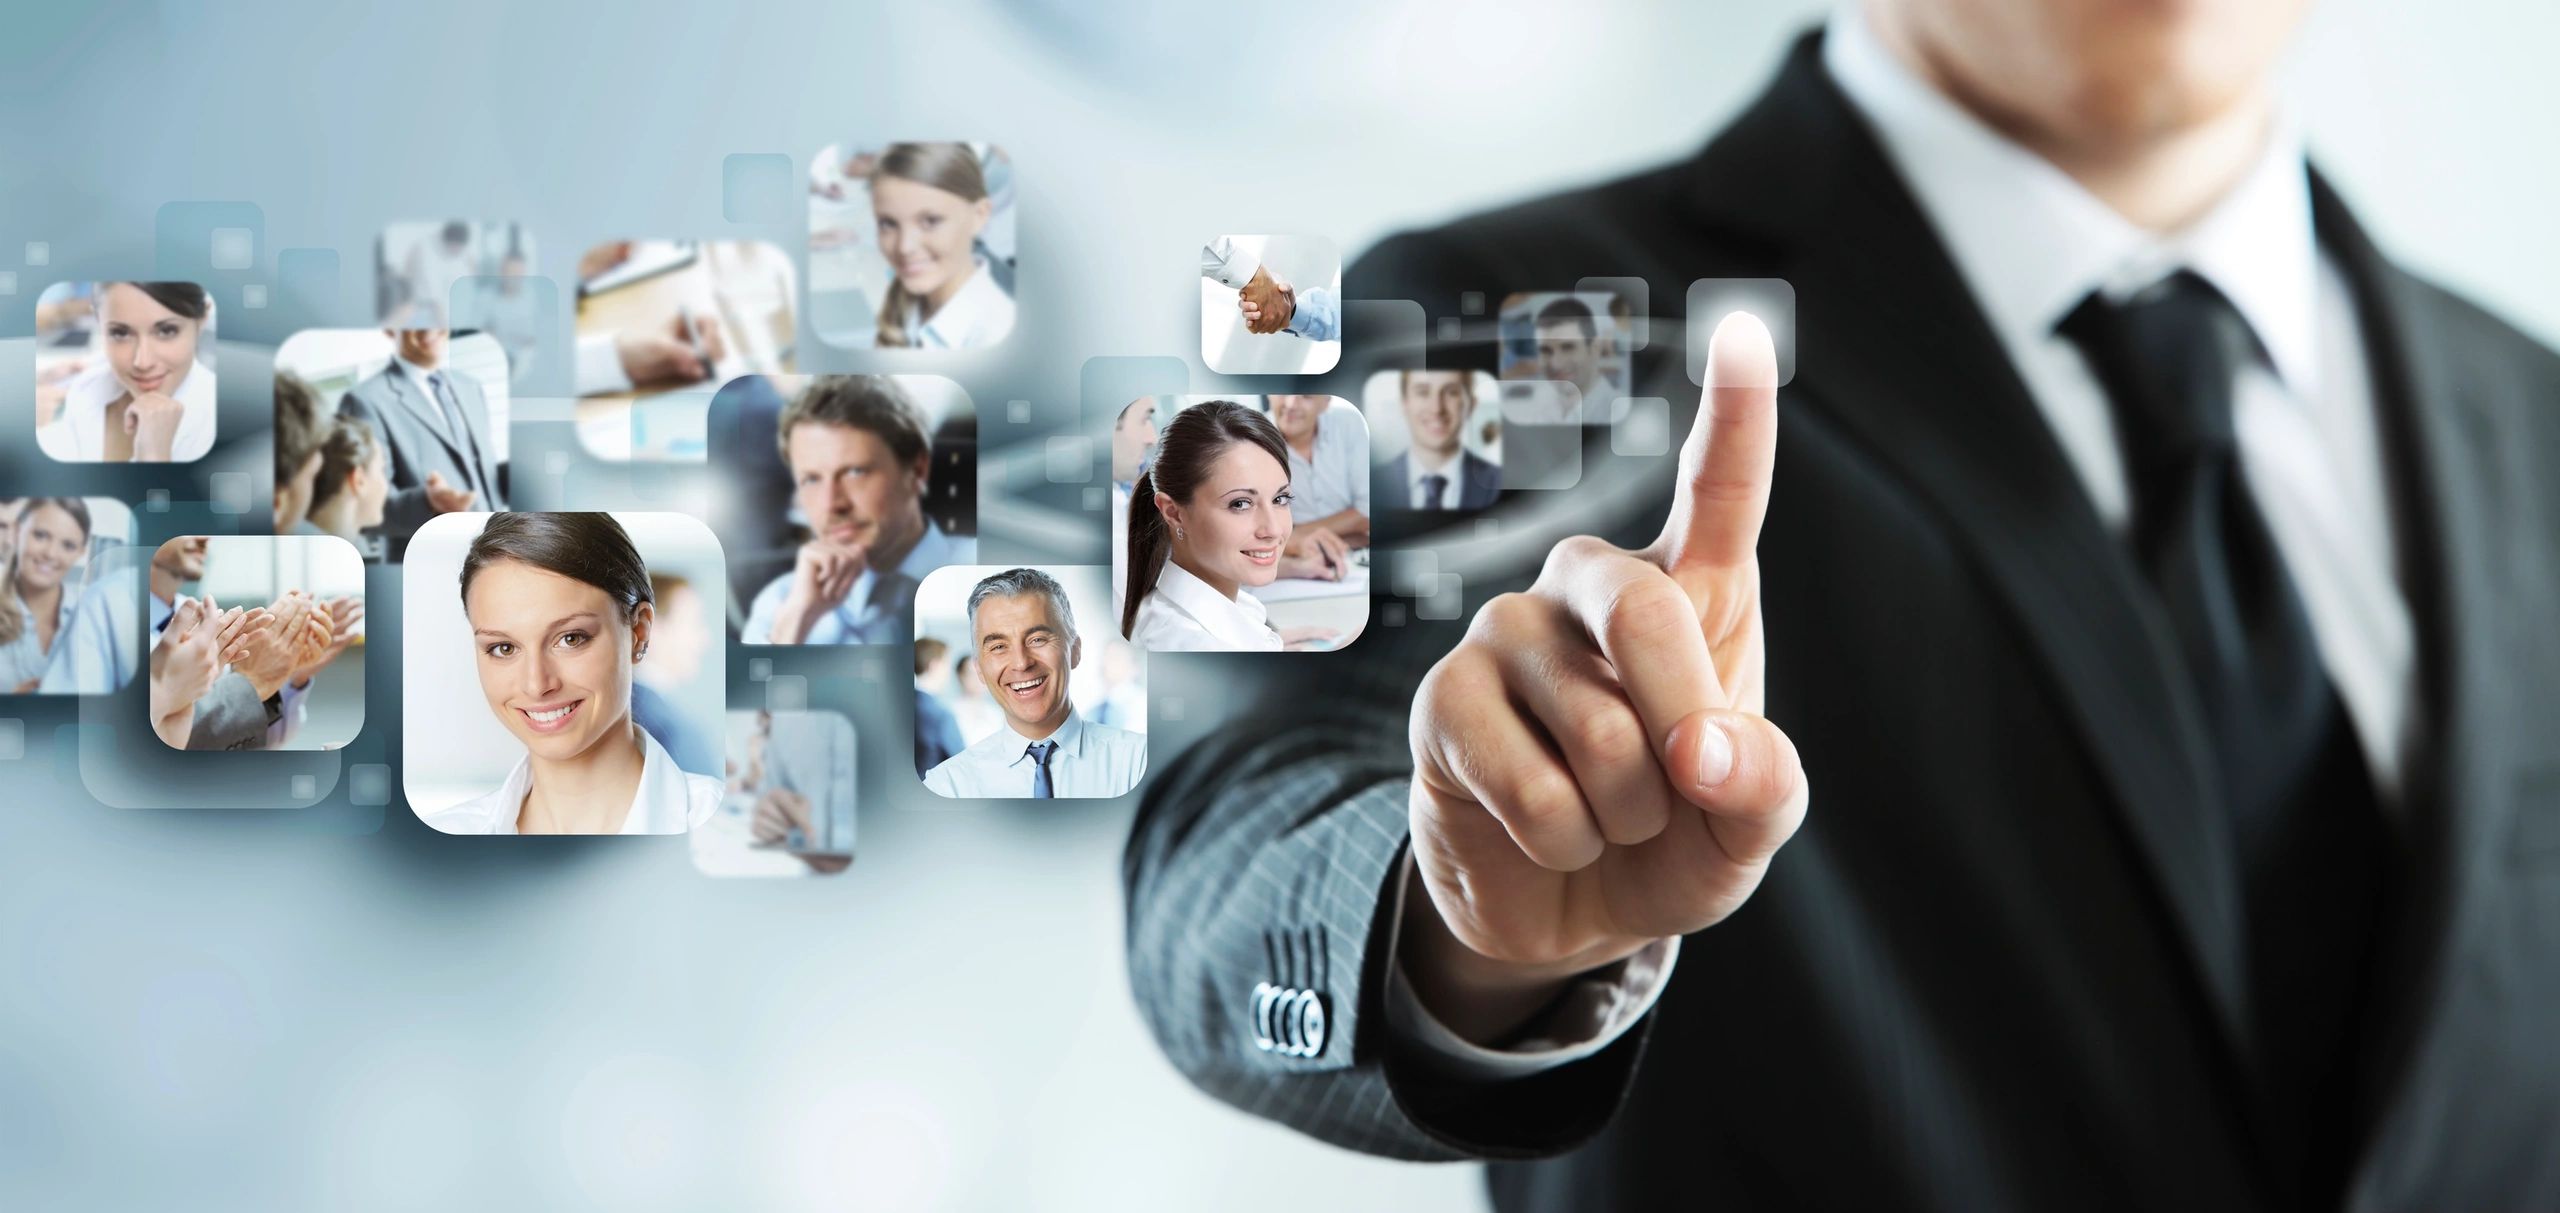 A man in suit and tie pointing to multiple images of people.